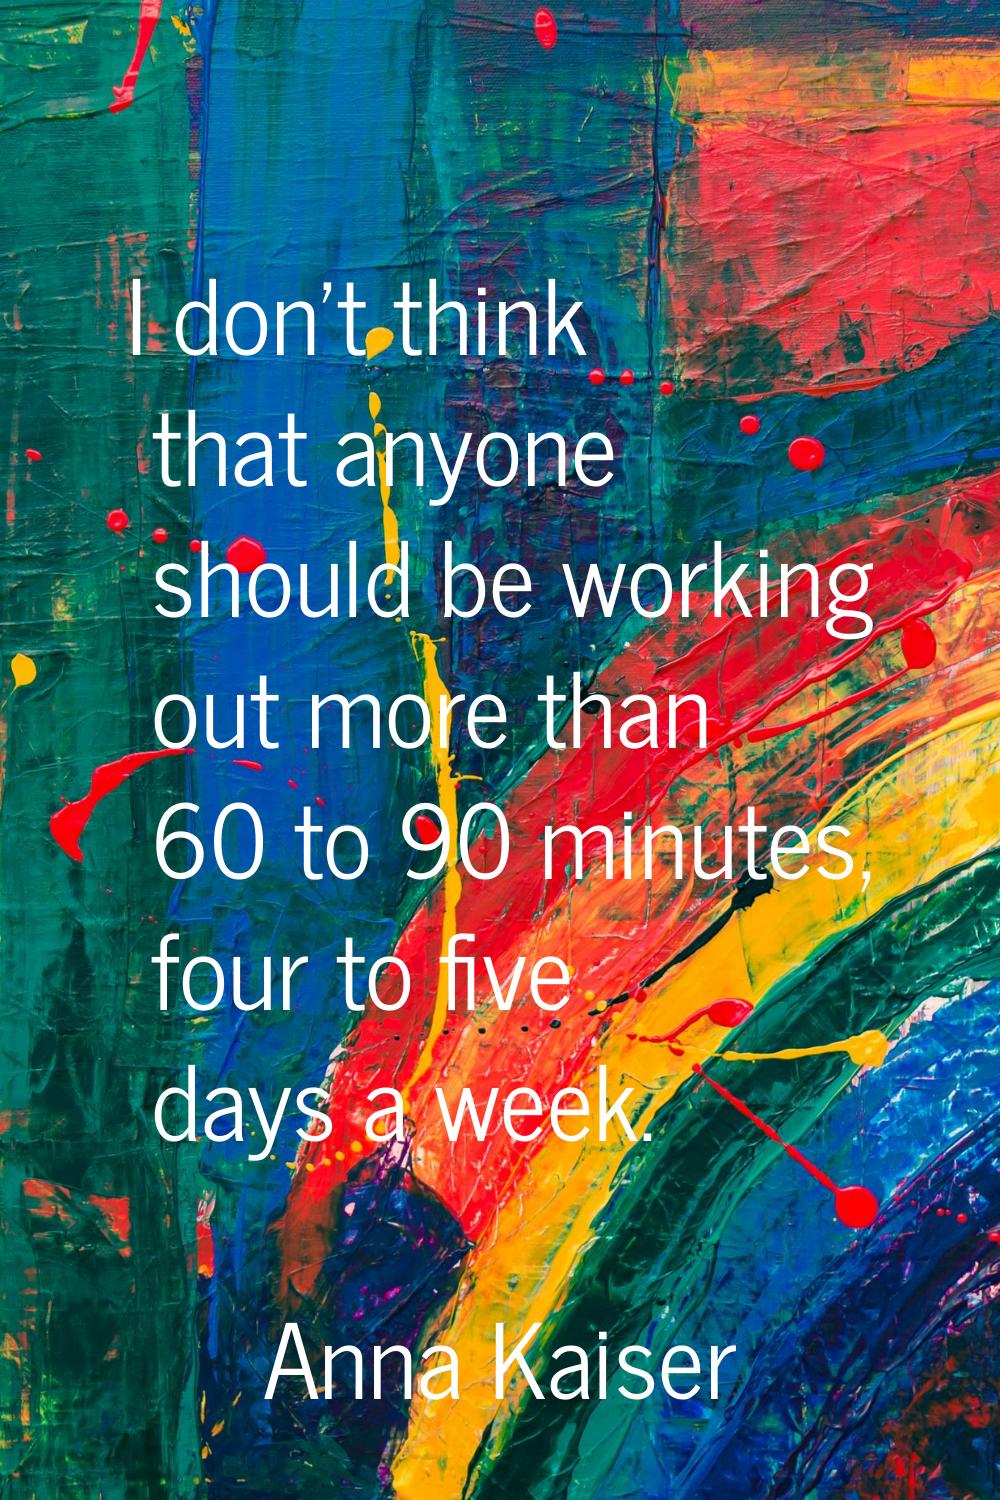 I don't think that anyone should be working out more than 60 to 90 minutes, four to five days a wee